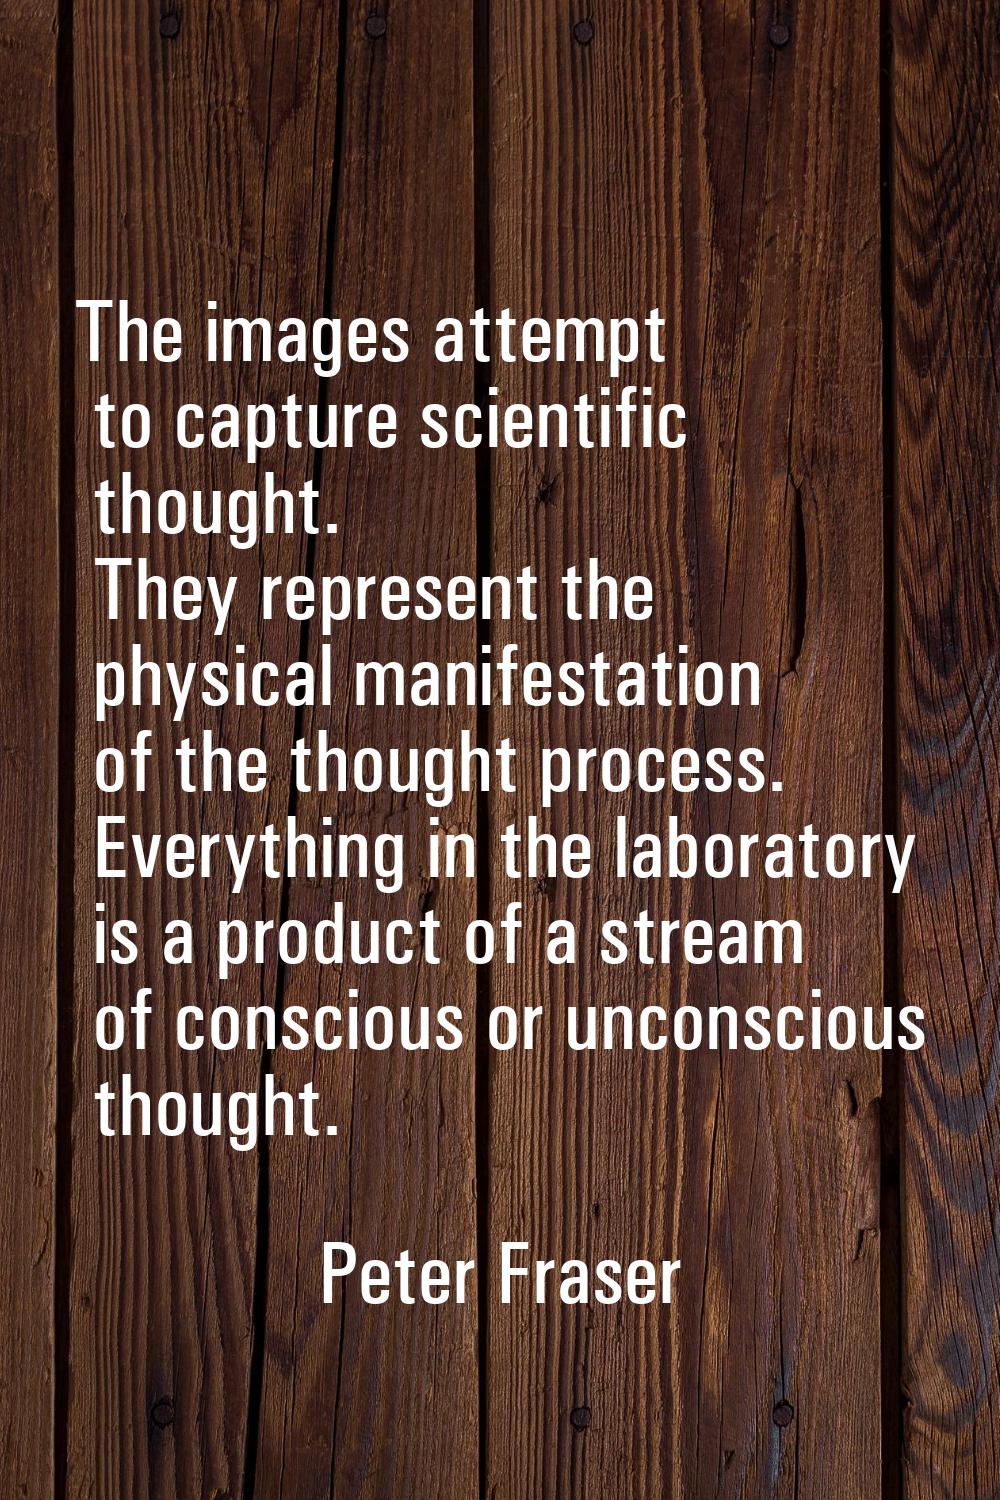 The images attempt to capture scientific thought. They represent the physical manifestation of the 